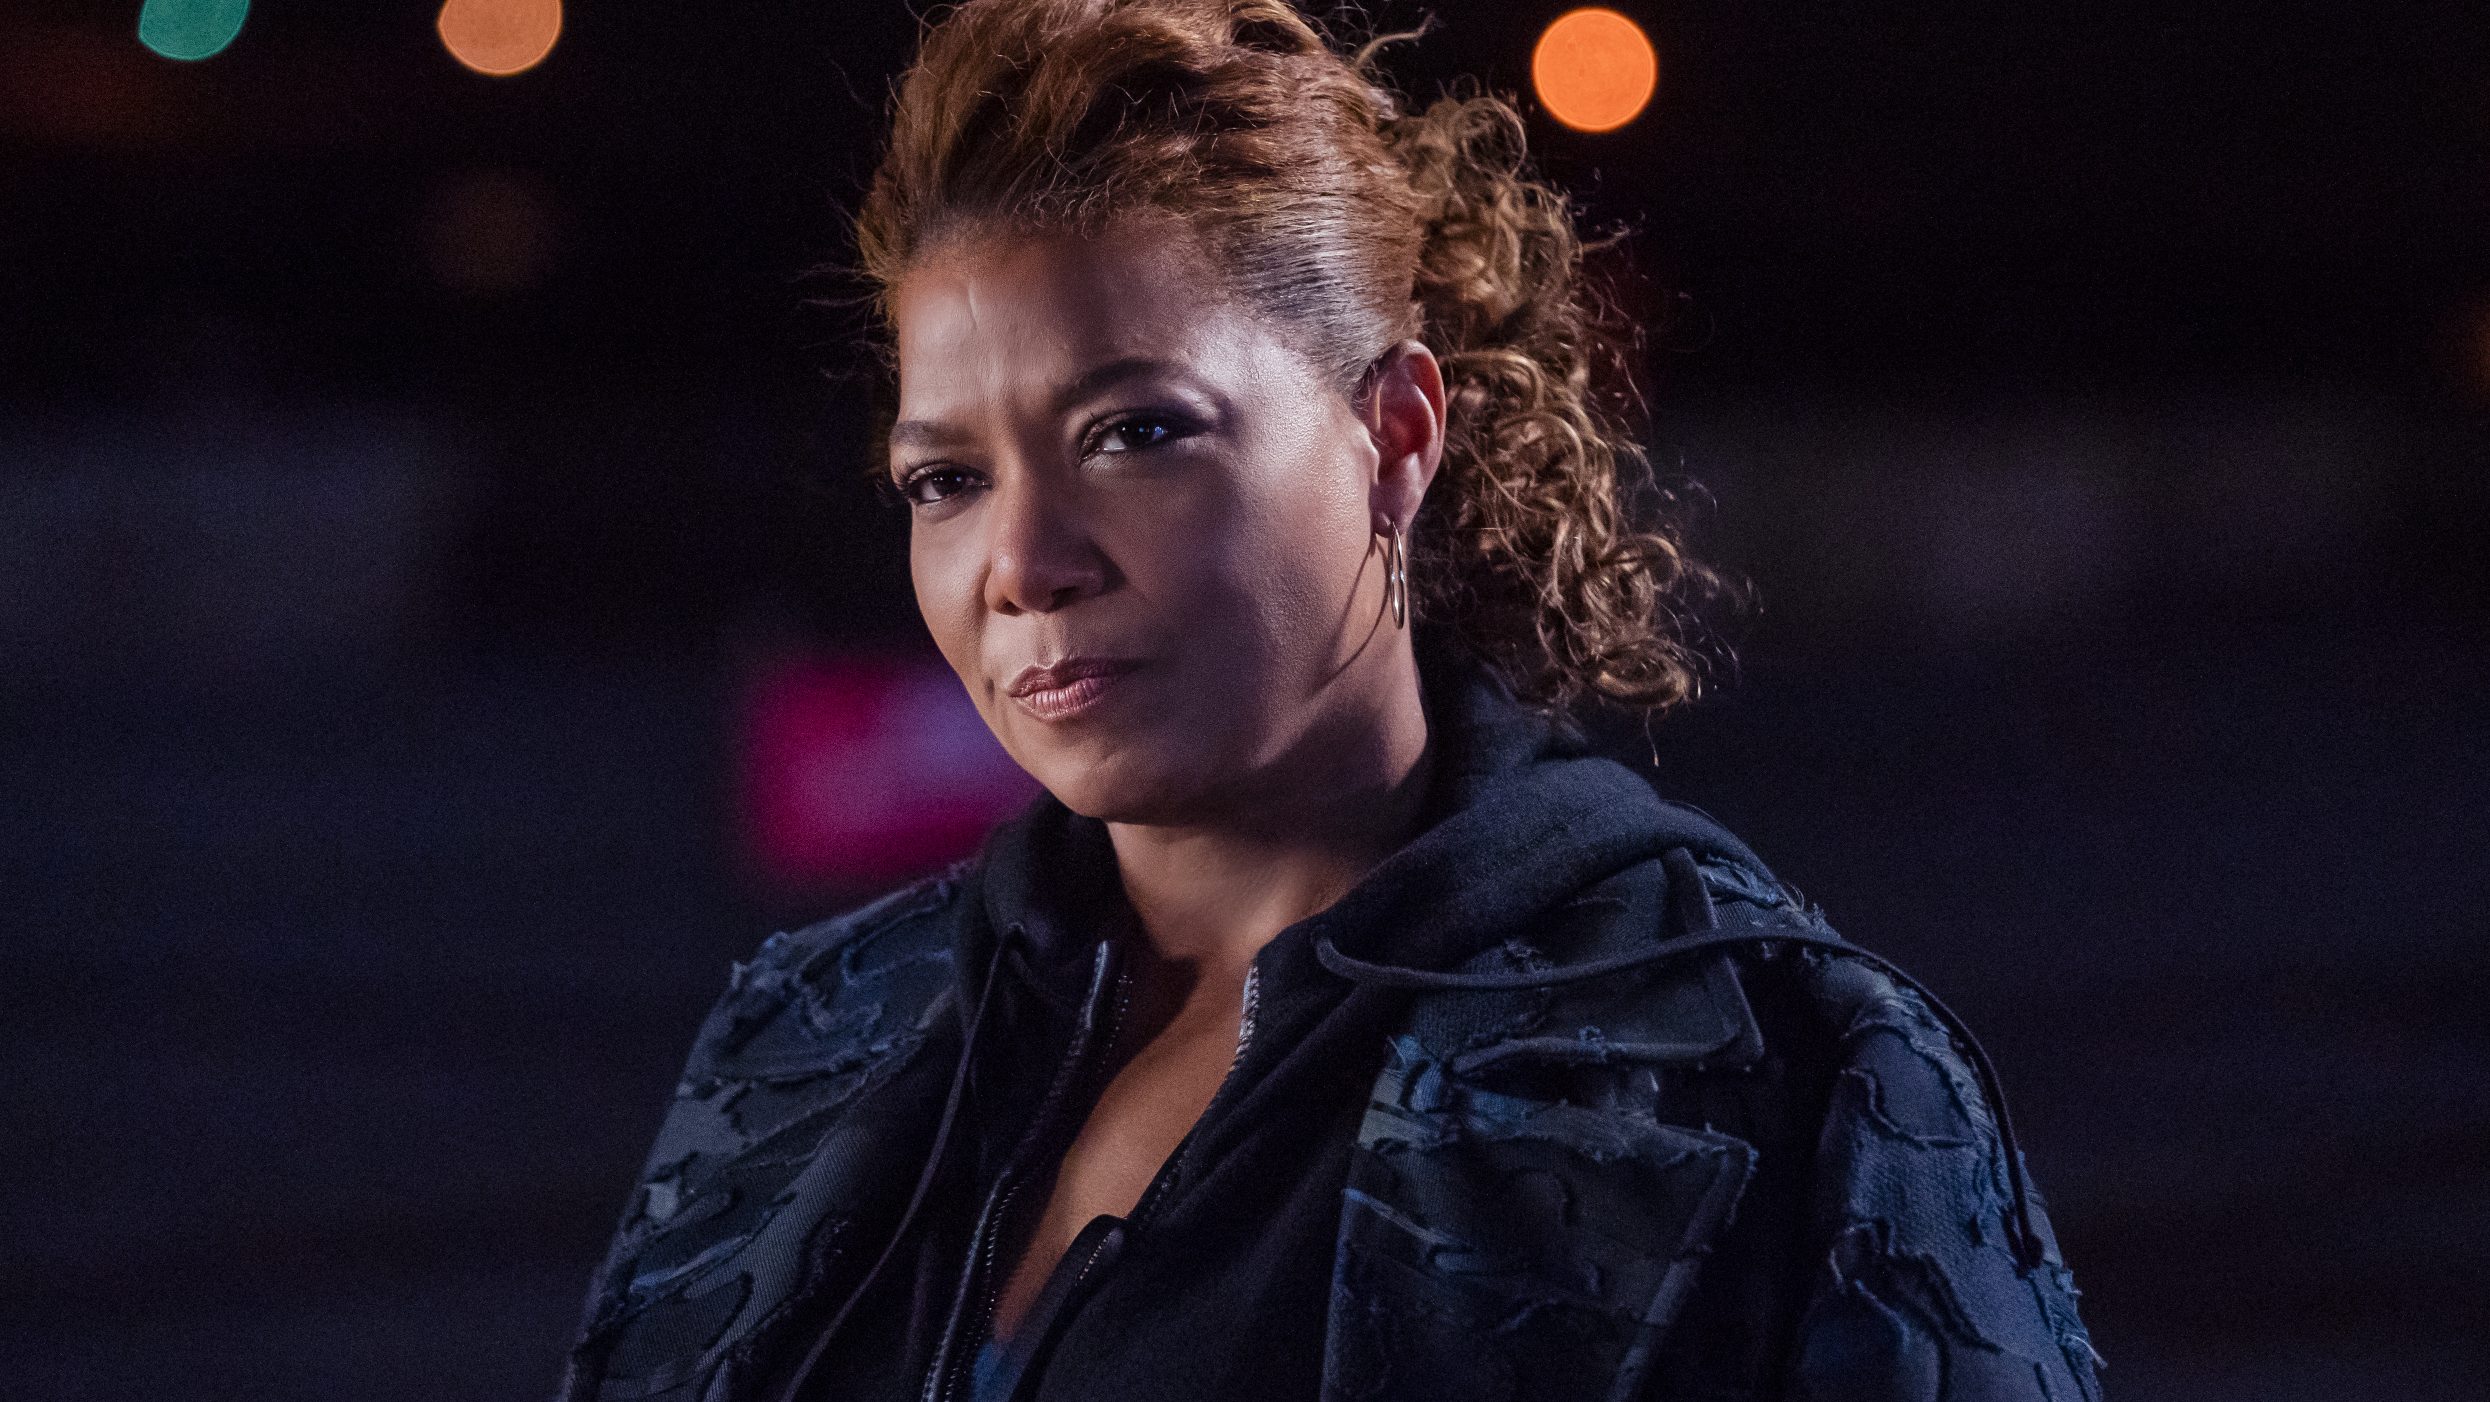 The series premiere of the CBS Original drama THE EQUALIZER, starring Academy Award nominee and multi-hyphenate Queen Latifah